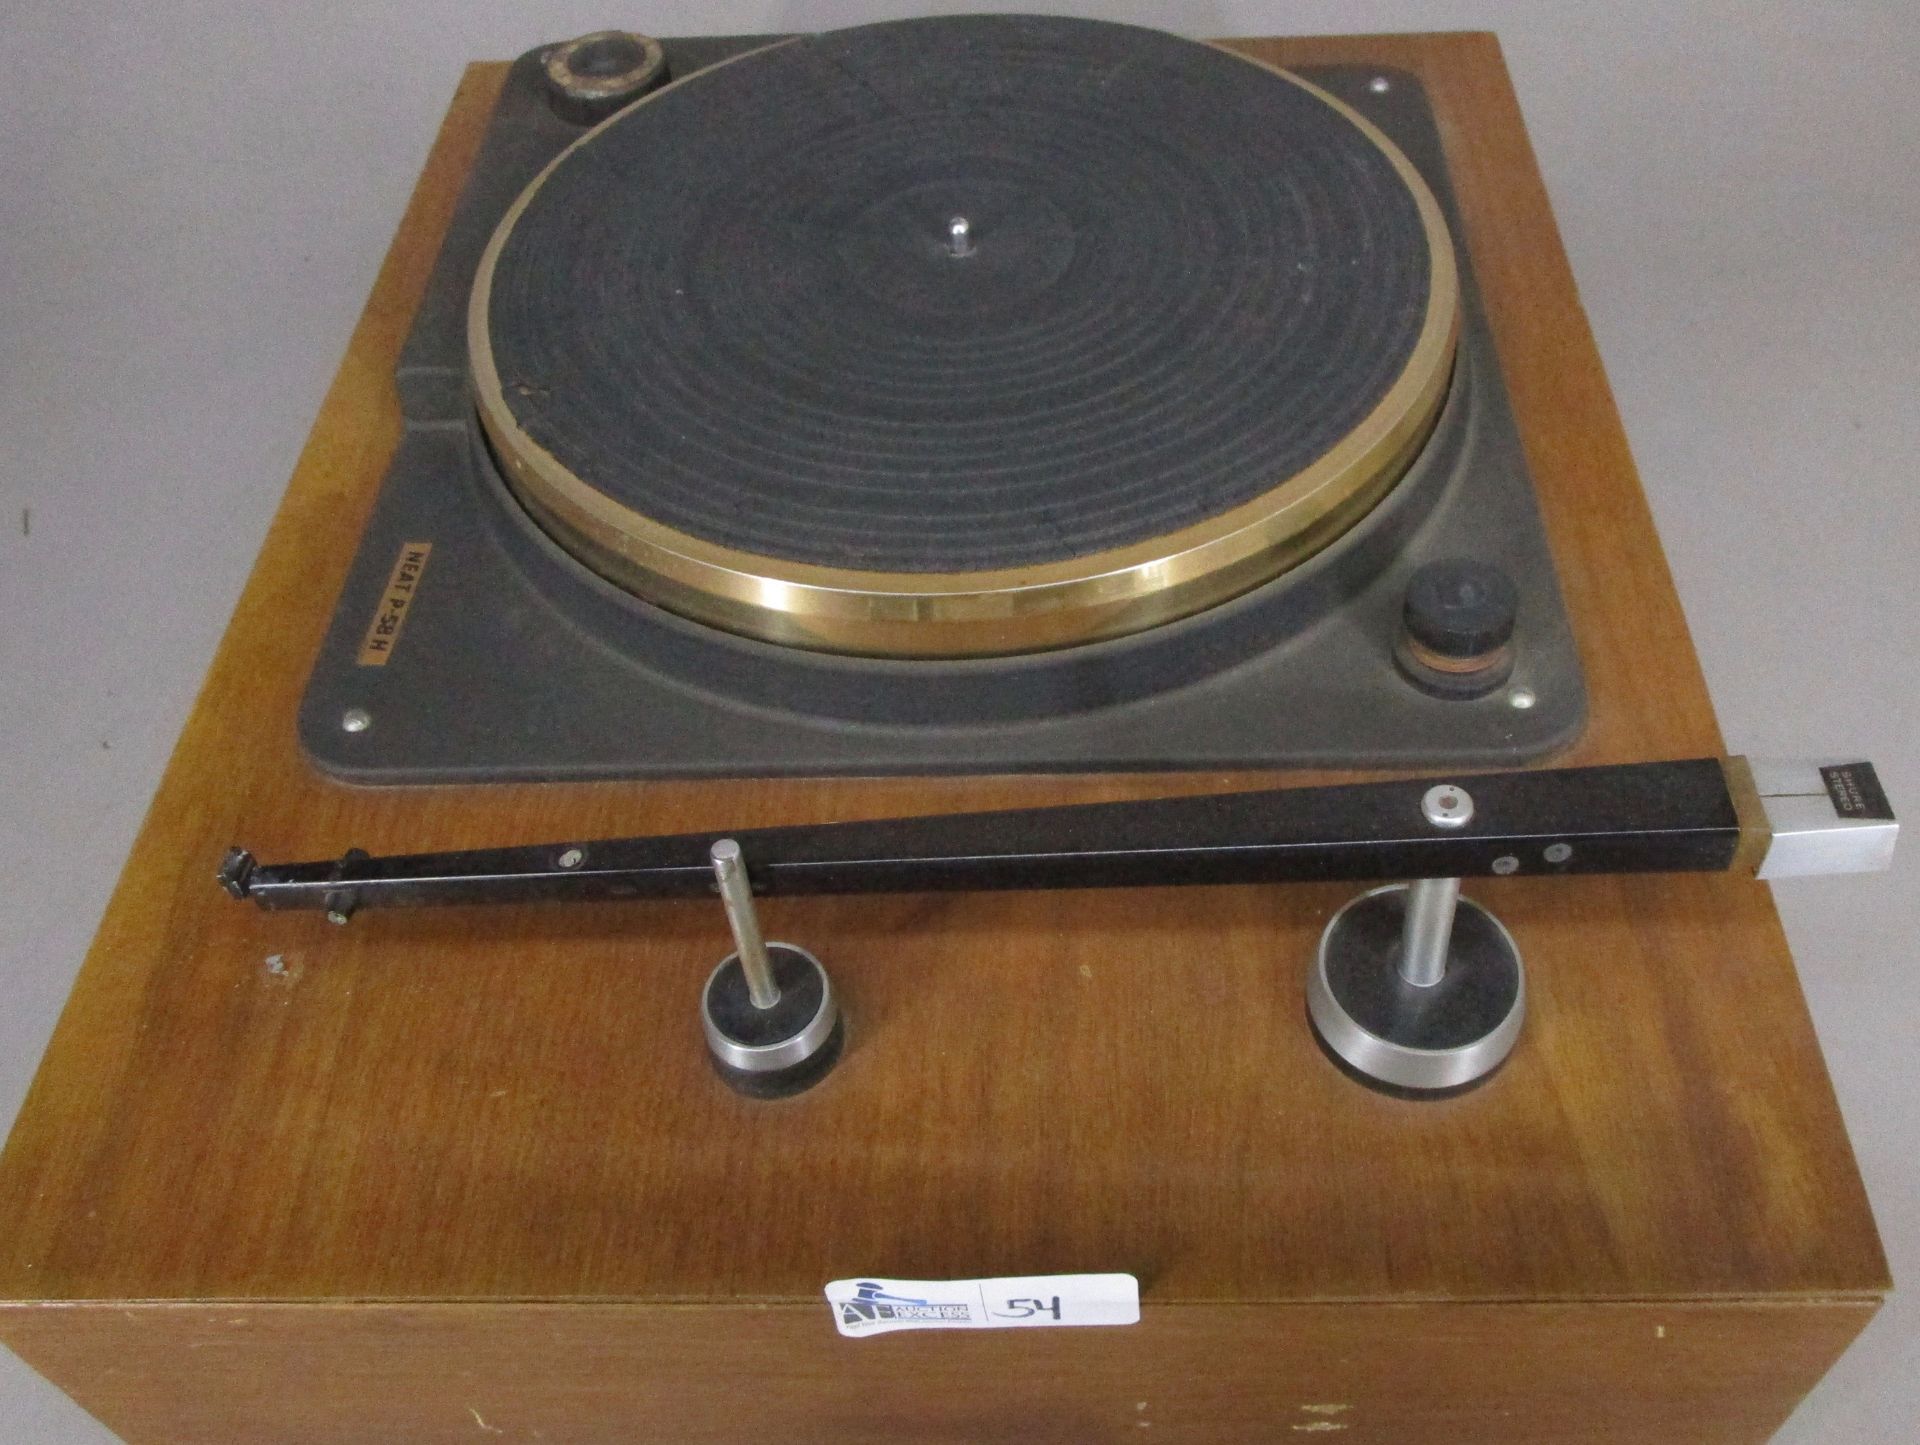 NEAT P-58 H TURNTABLE WITH SHURE TONEARM - Image 4 of 5